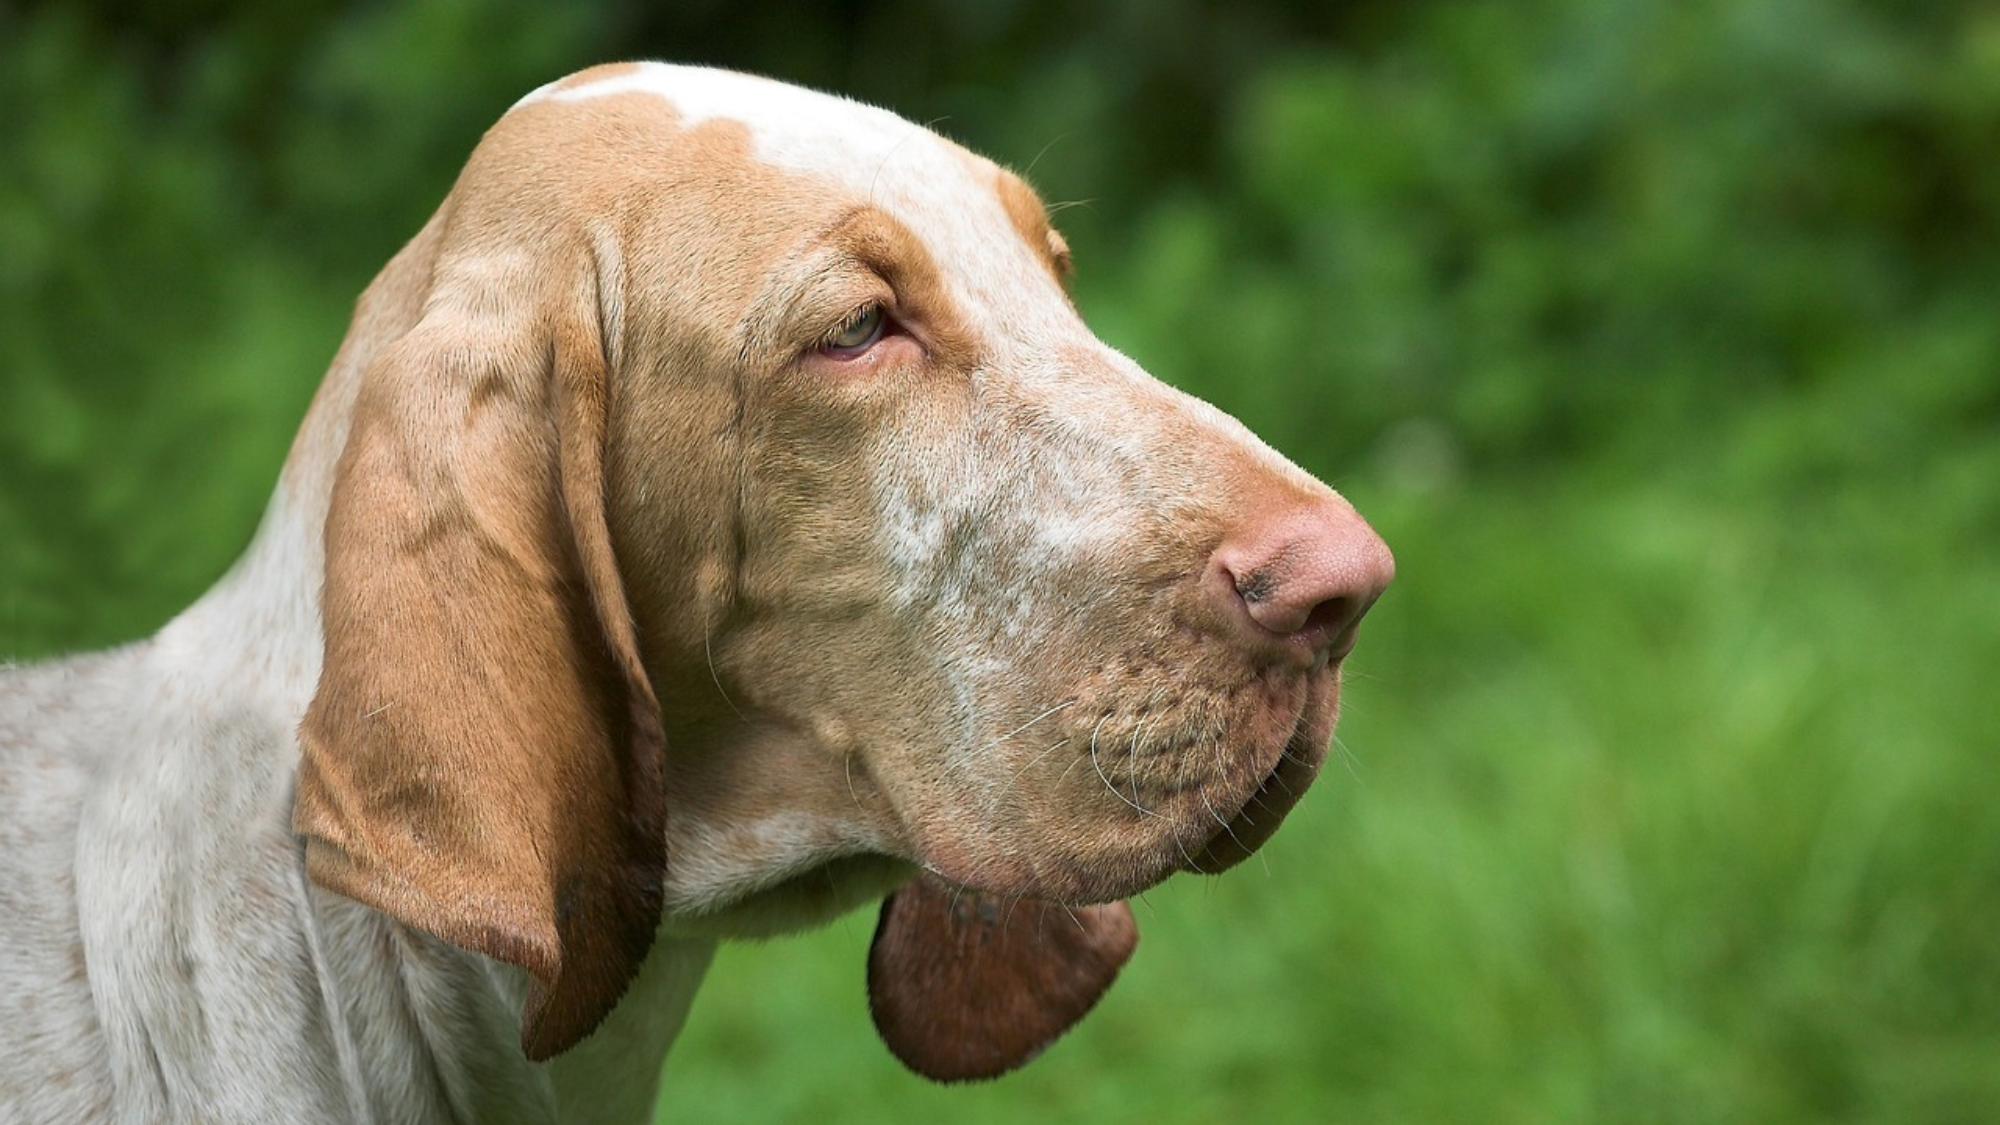 are bloodhound dogs good pets?